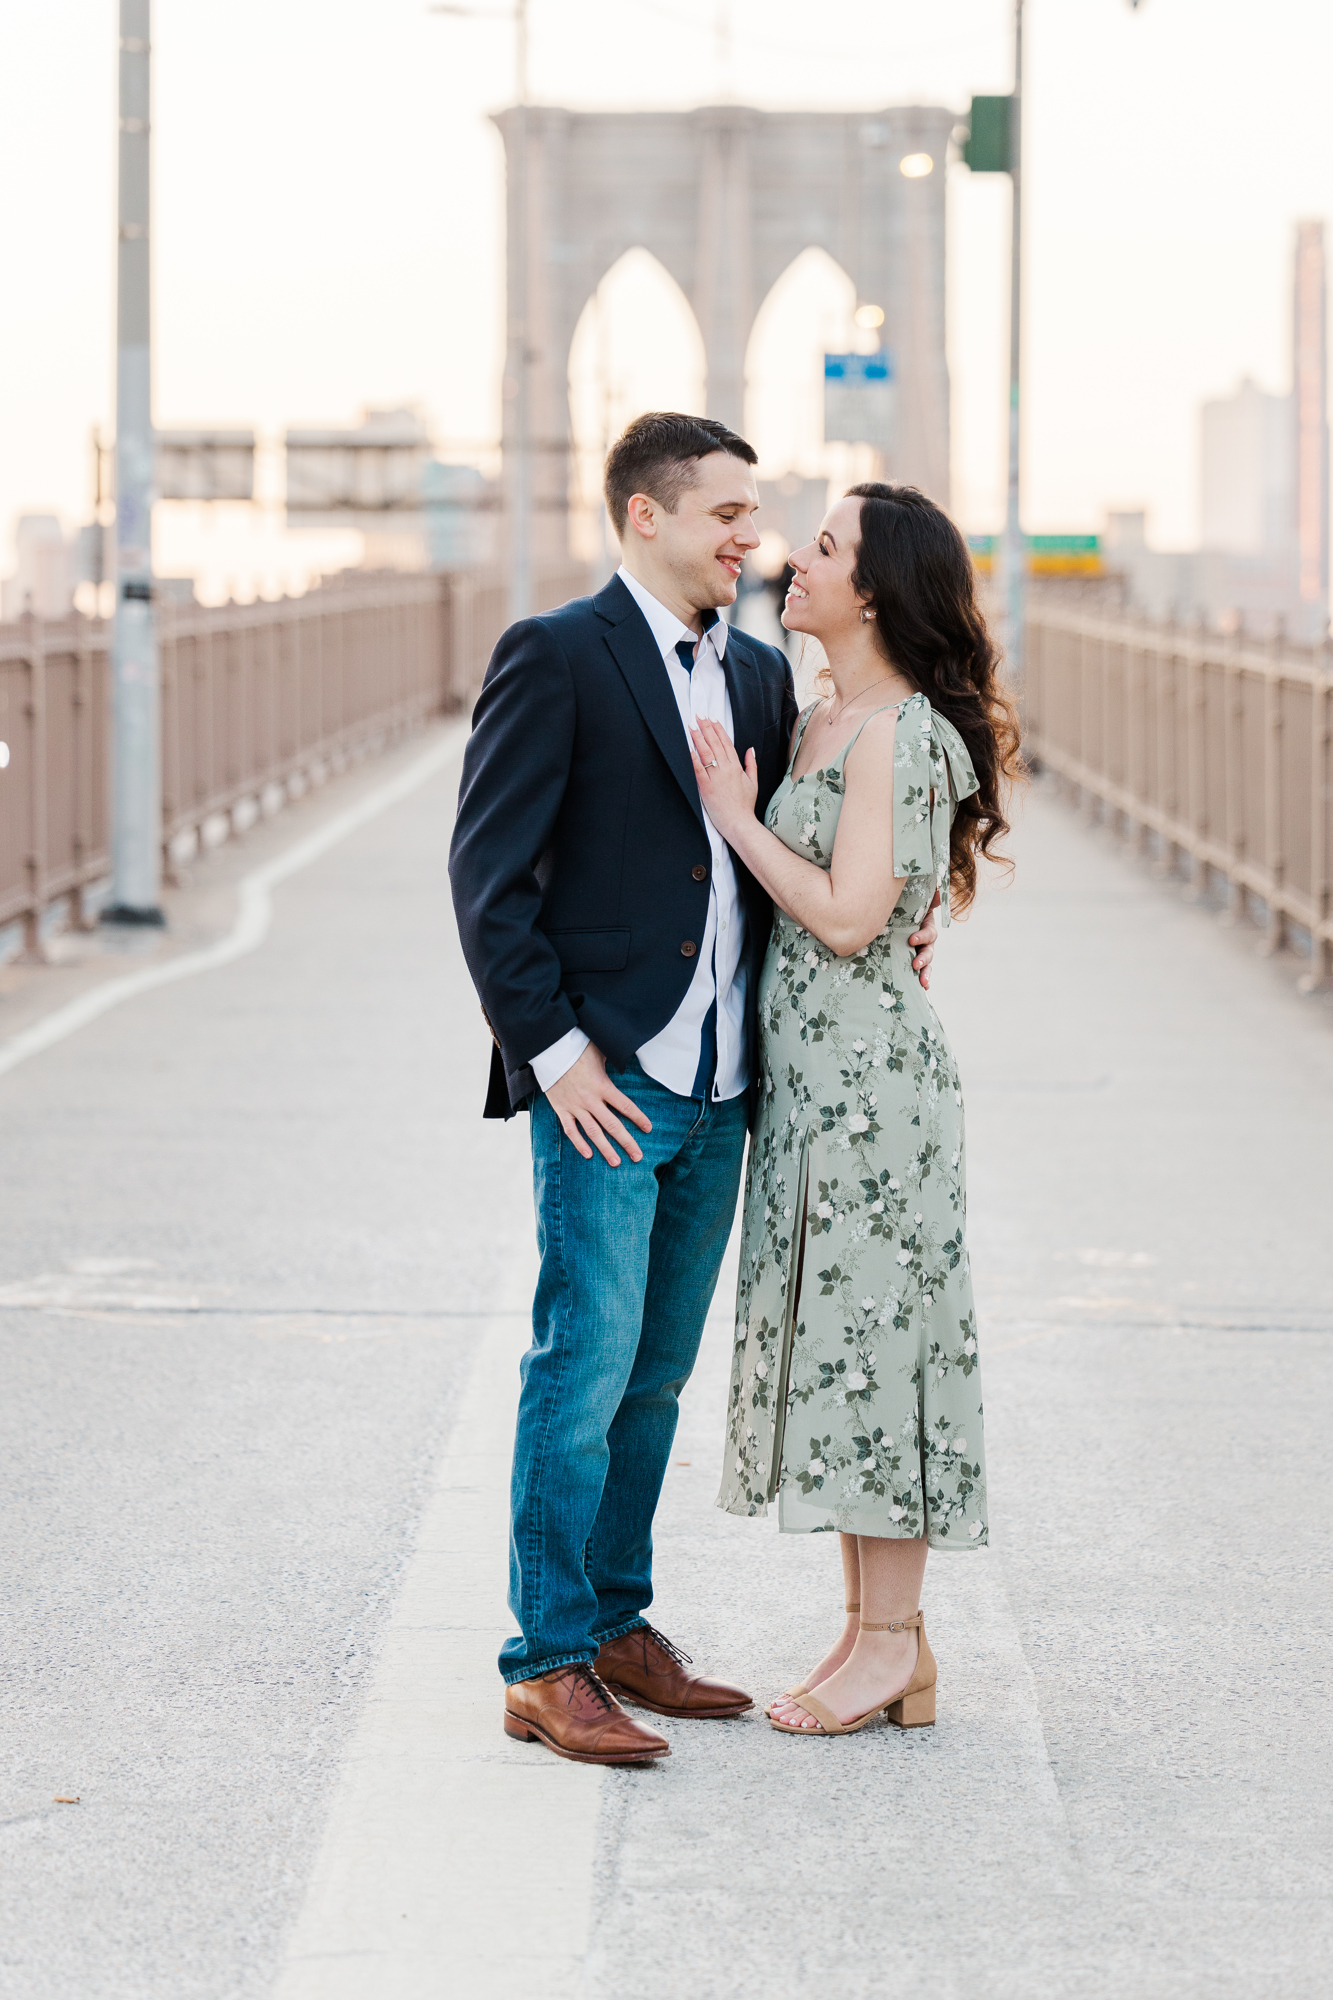 Touching Brooklyn Bridge and South Street Seaport Engagement Photography